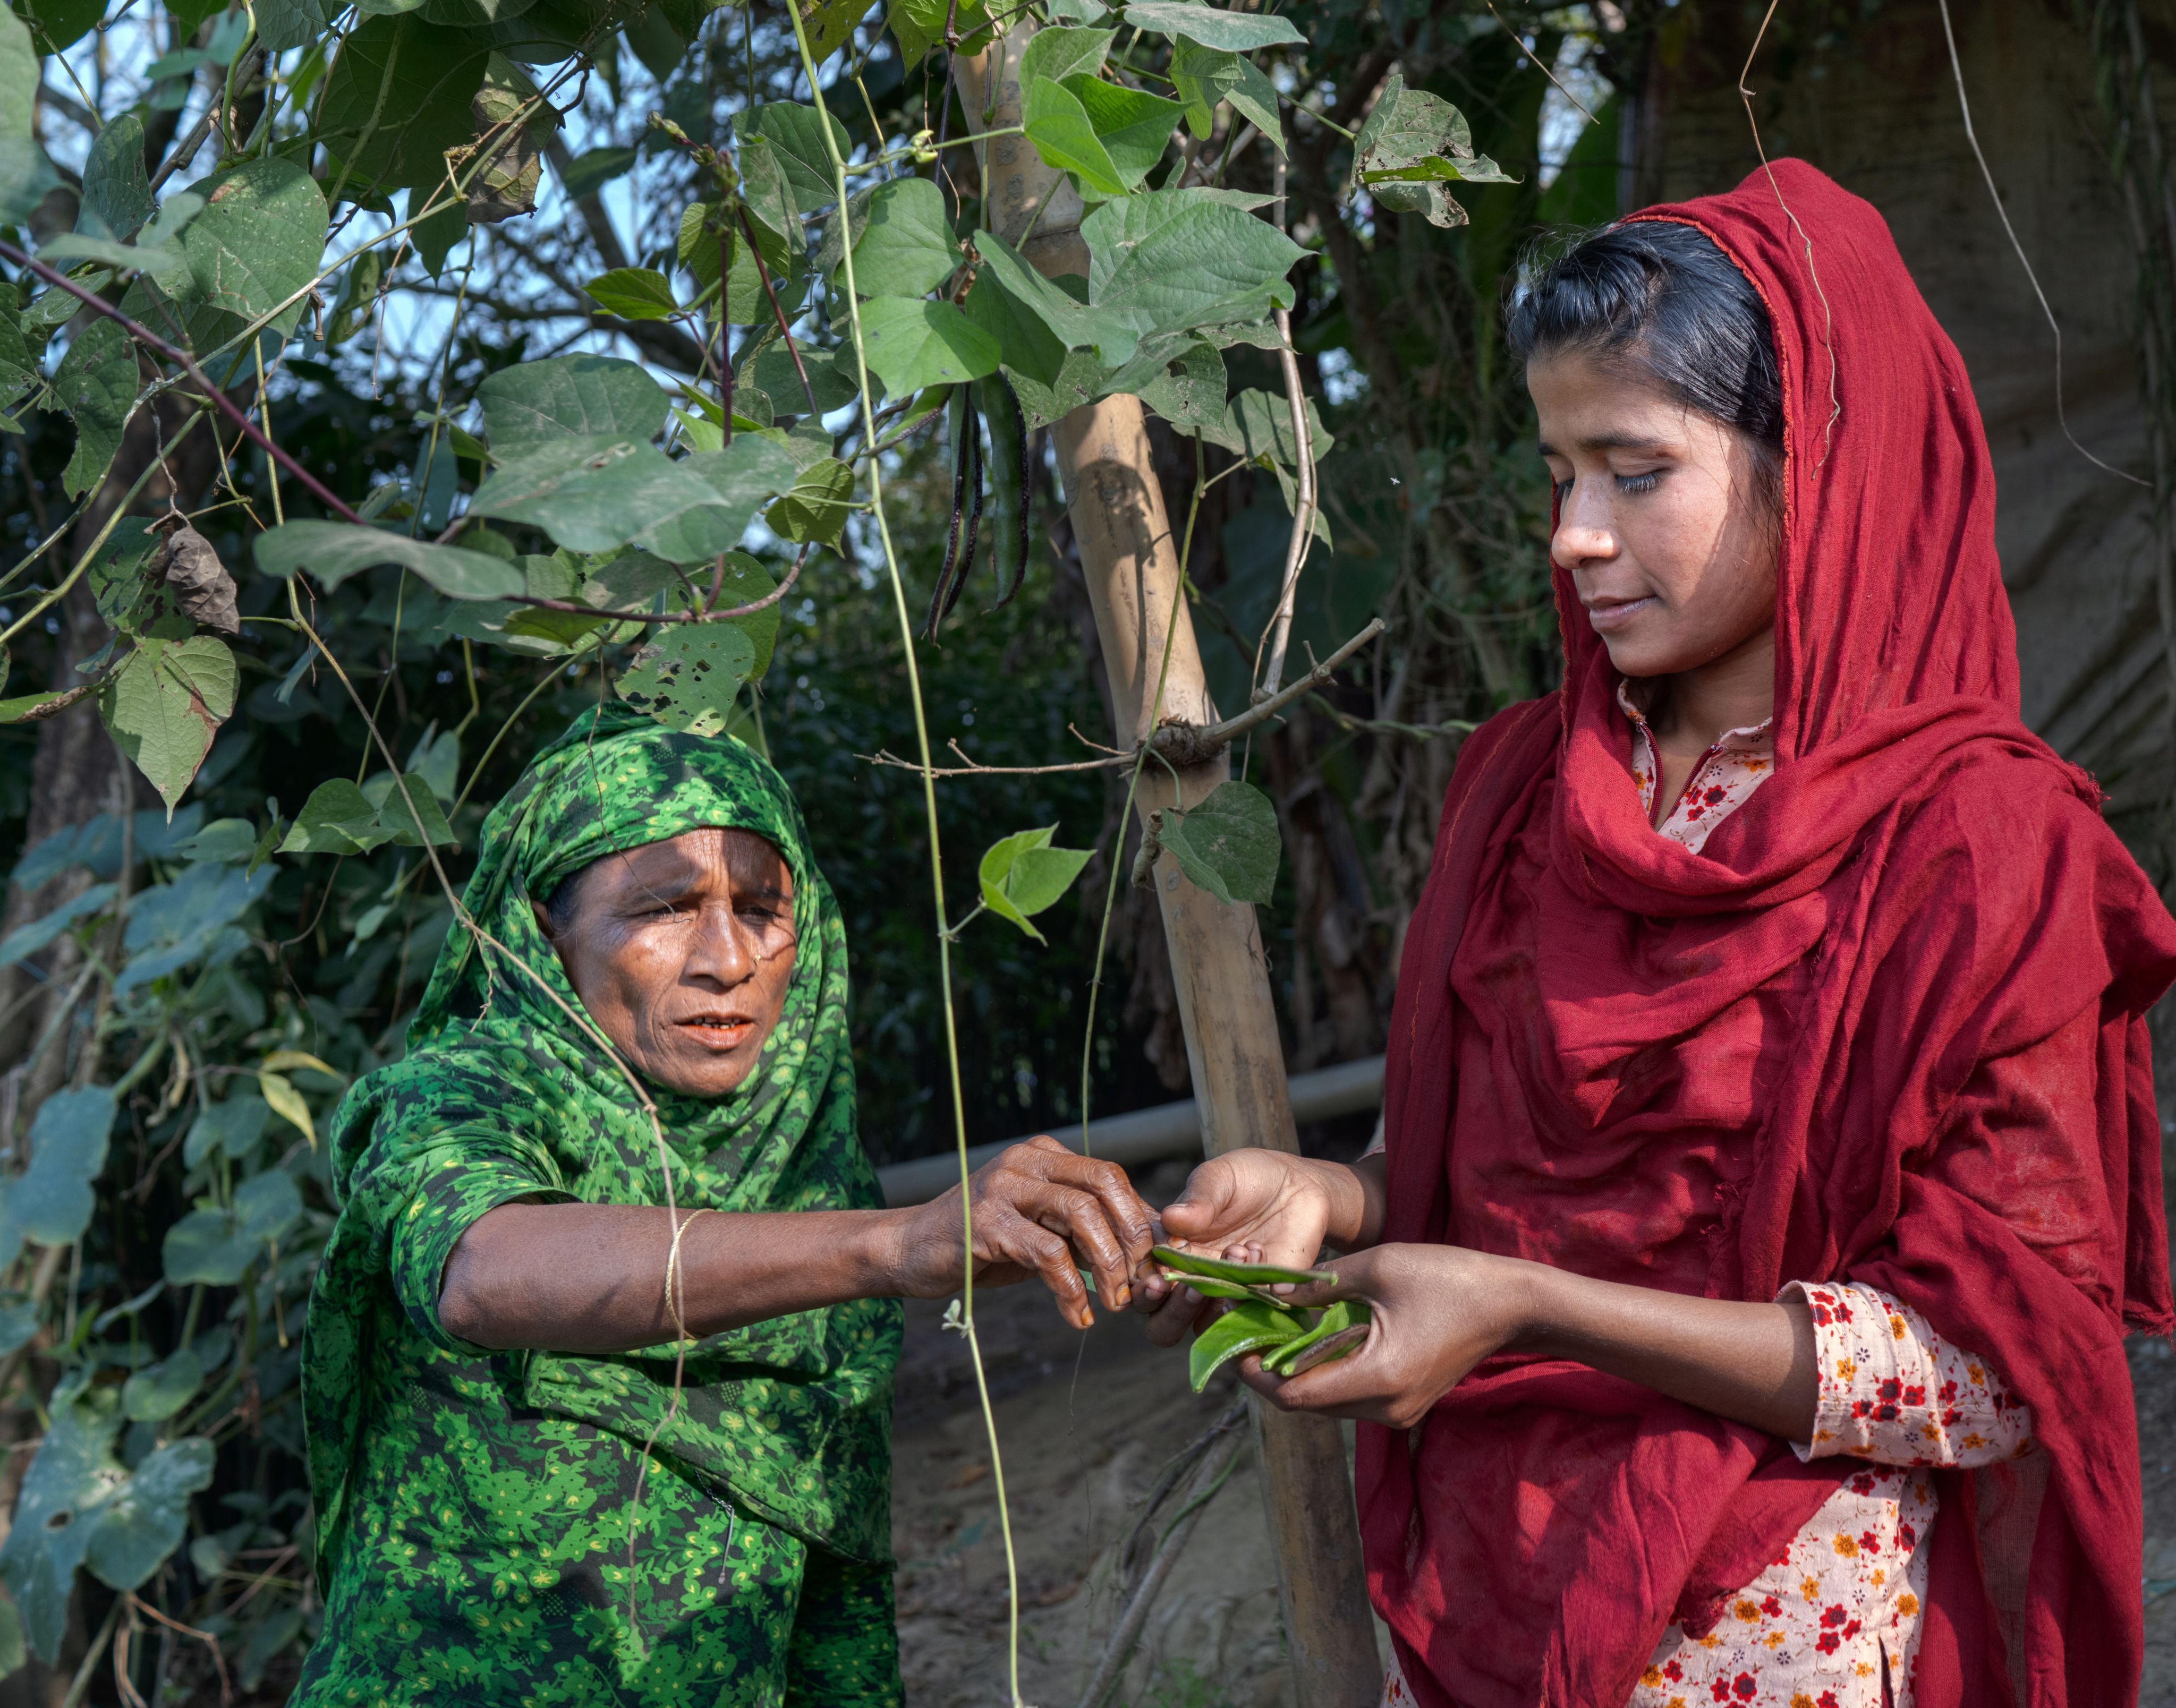 Munni, 18, and her mother pick beans for lunch at their home in Sylhet, Bangladesh.